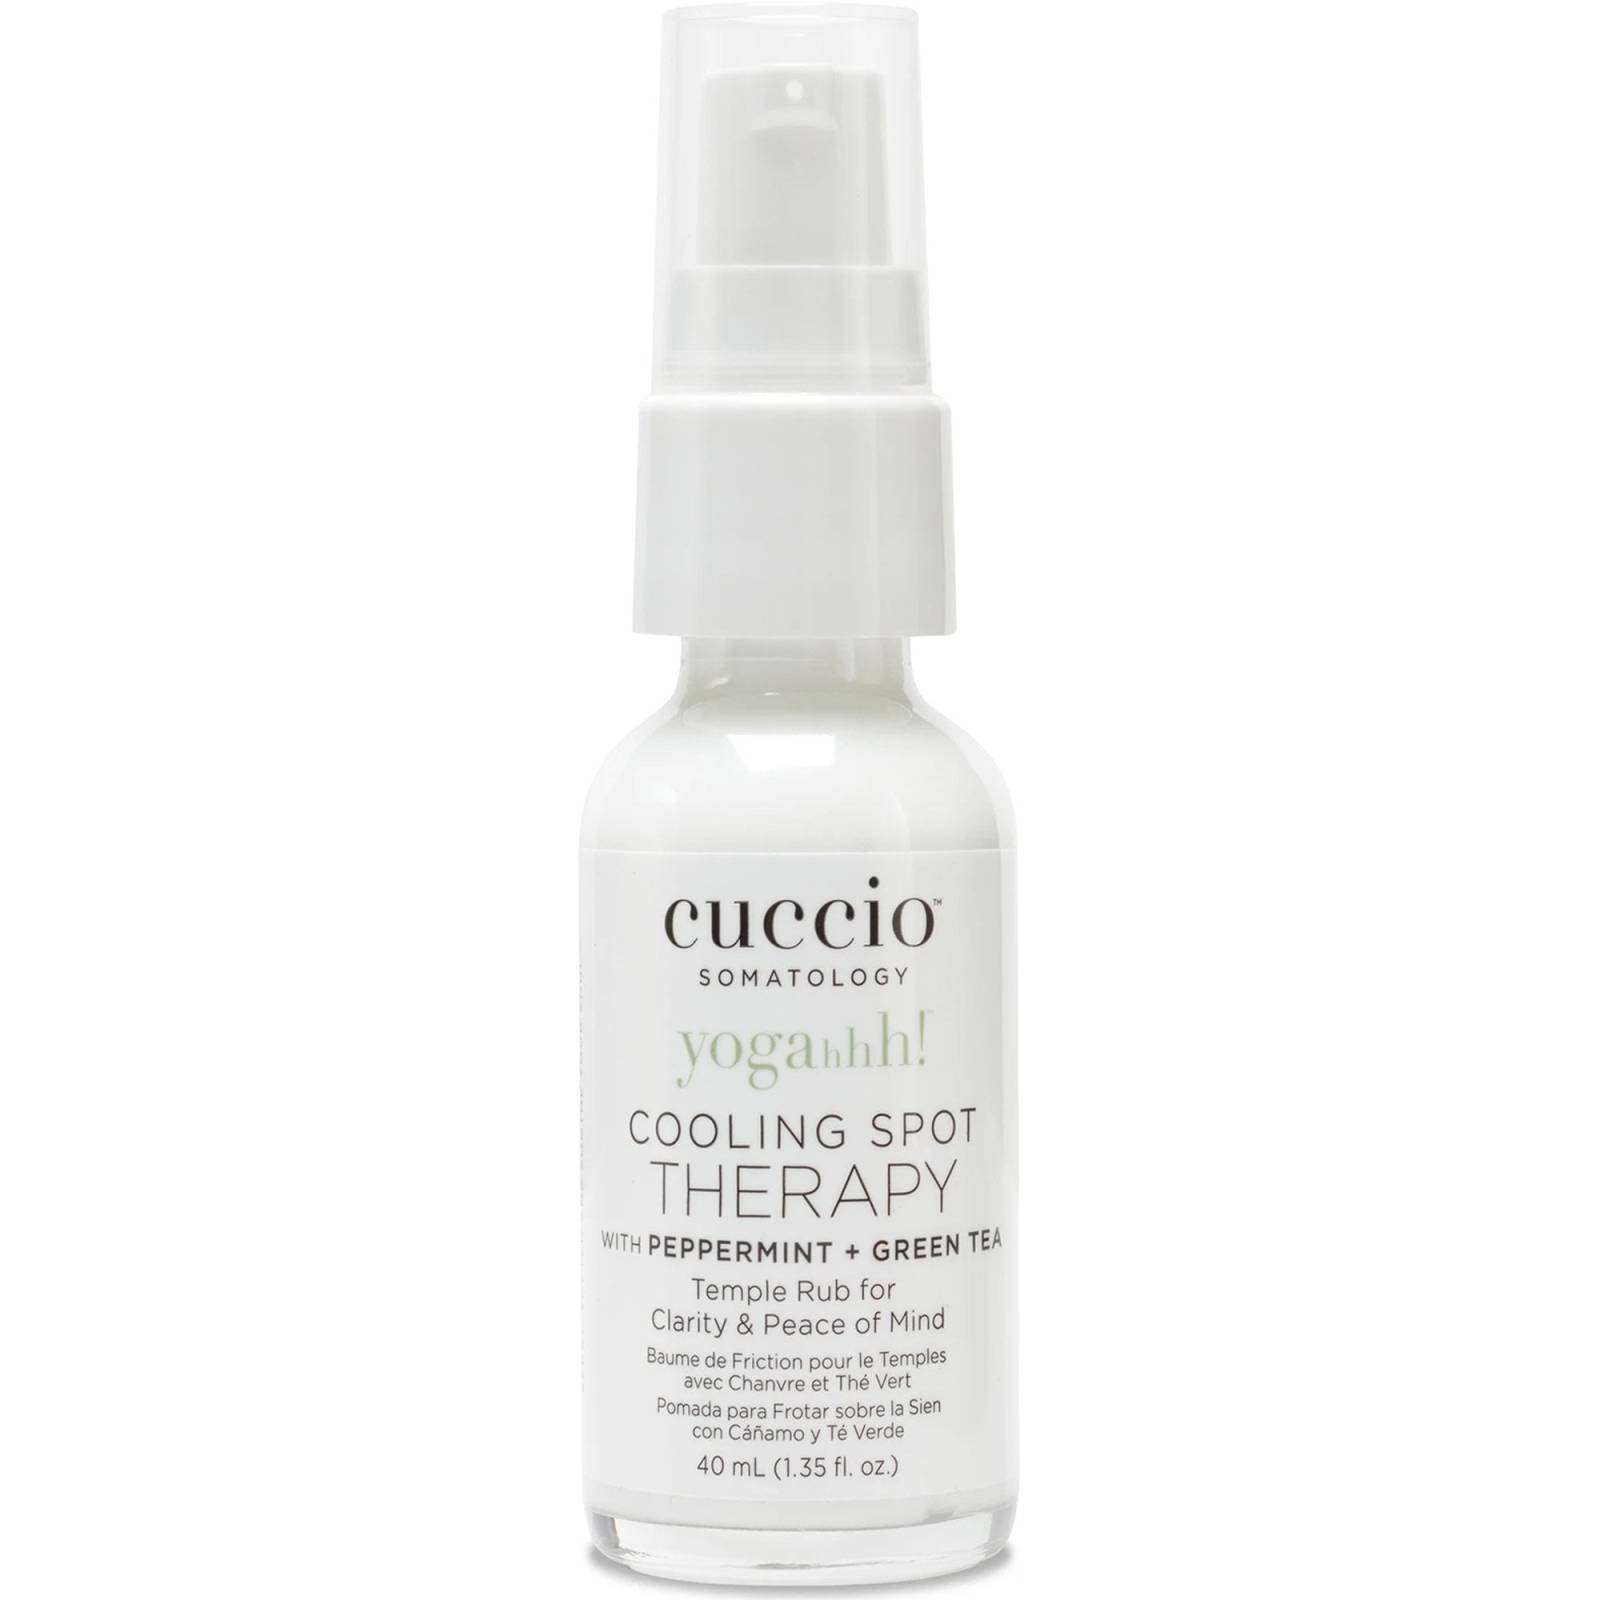 Cuccio Yogahhh! Cooling Spot Therapy With Peppermint And Green Tea 40ml